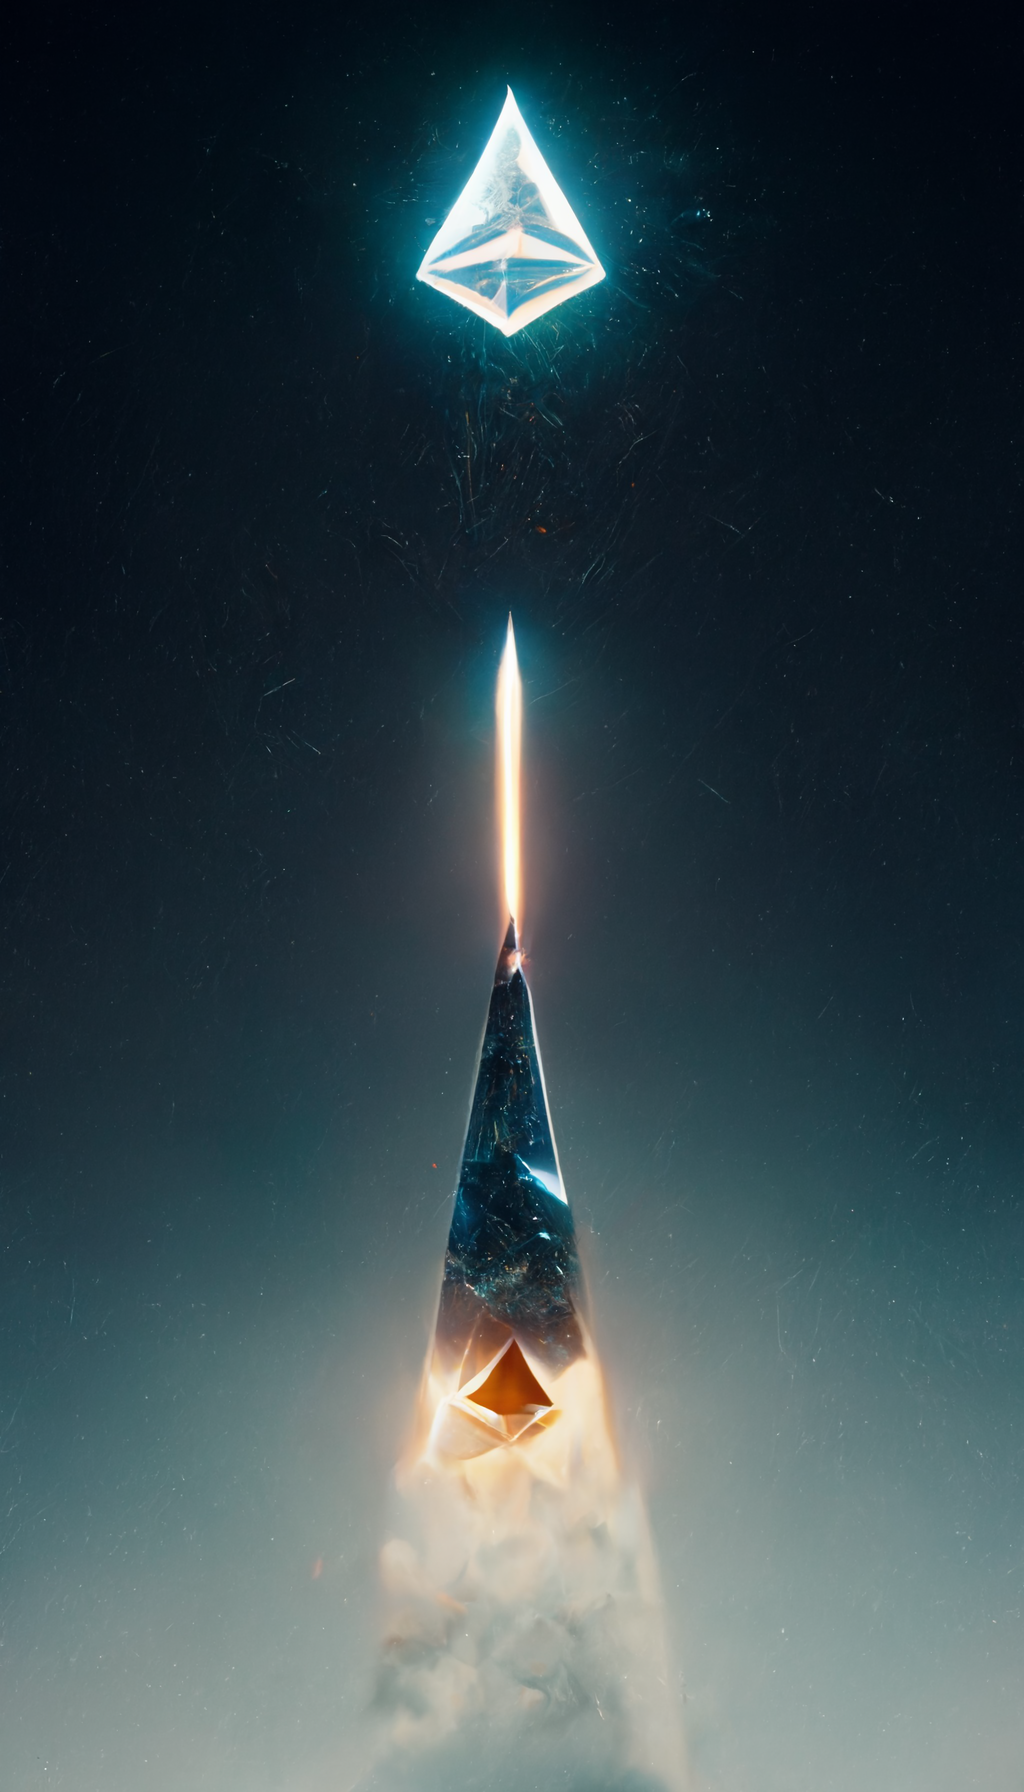 Displaying a file named Grunderwear_cinematic_shot_the_diamond_shaped_Ethereum_logo_att_6a099644-561d-4756-bba5-5b62972ef0fb.png